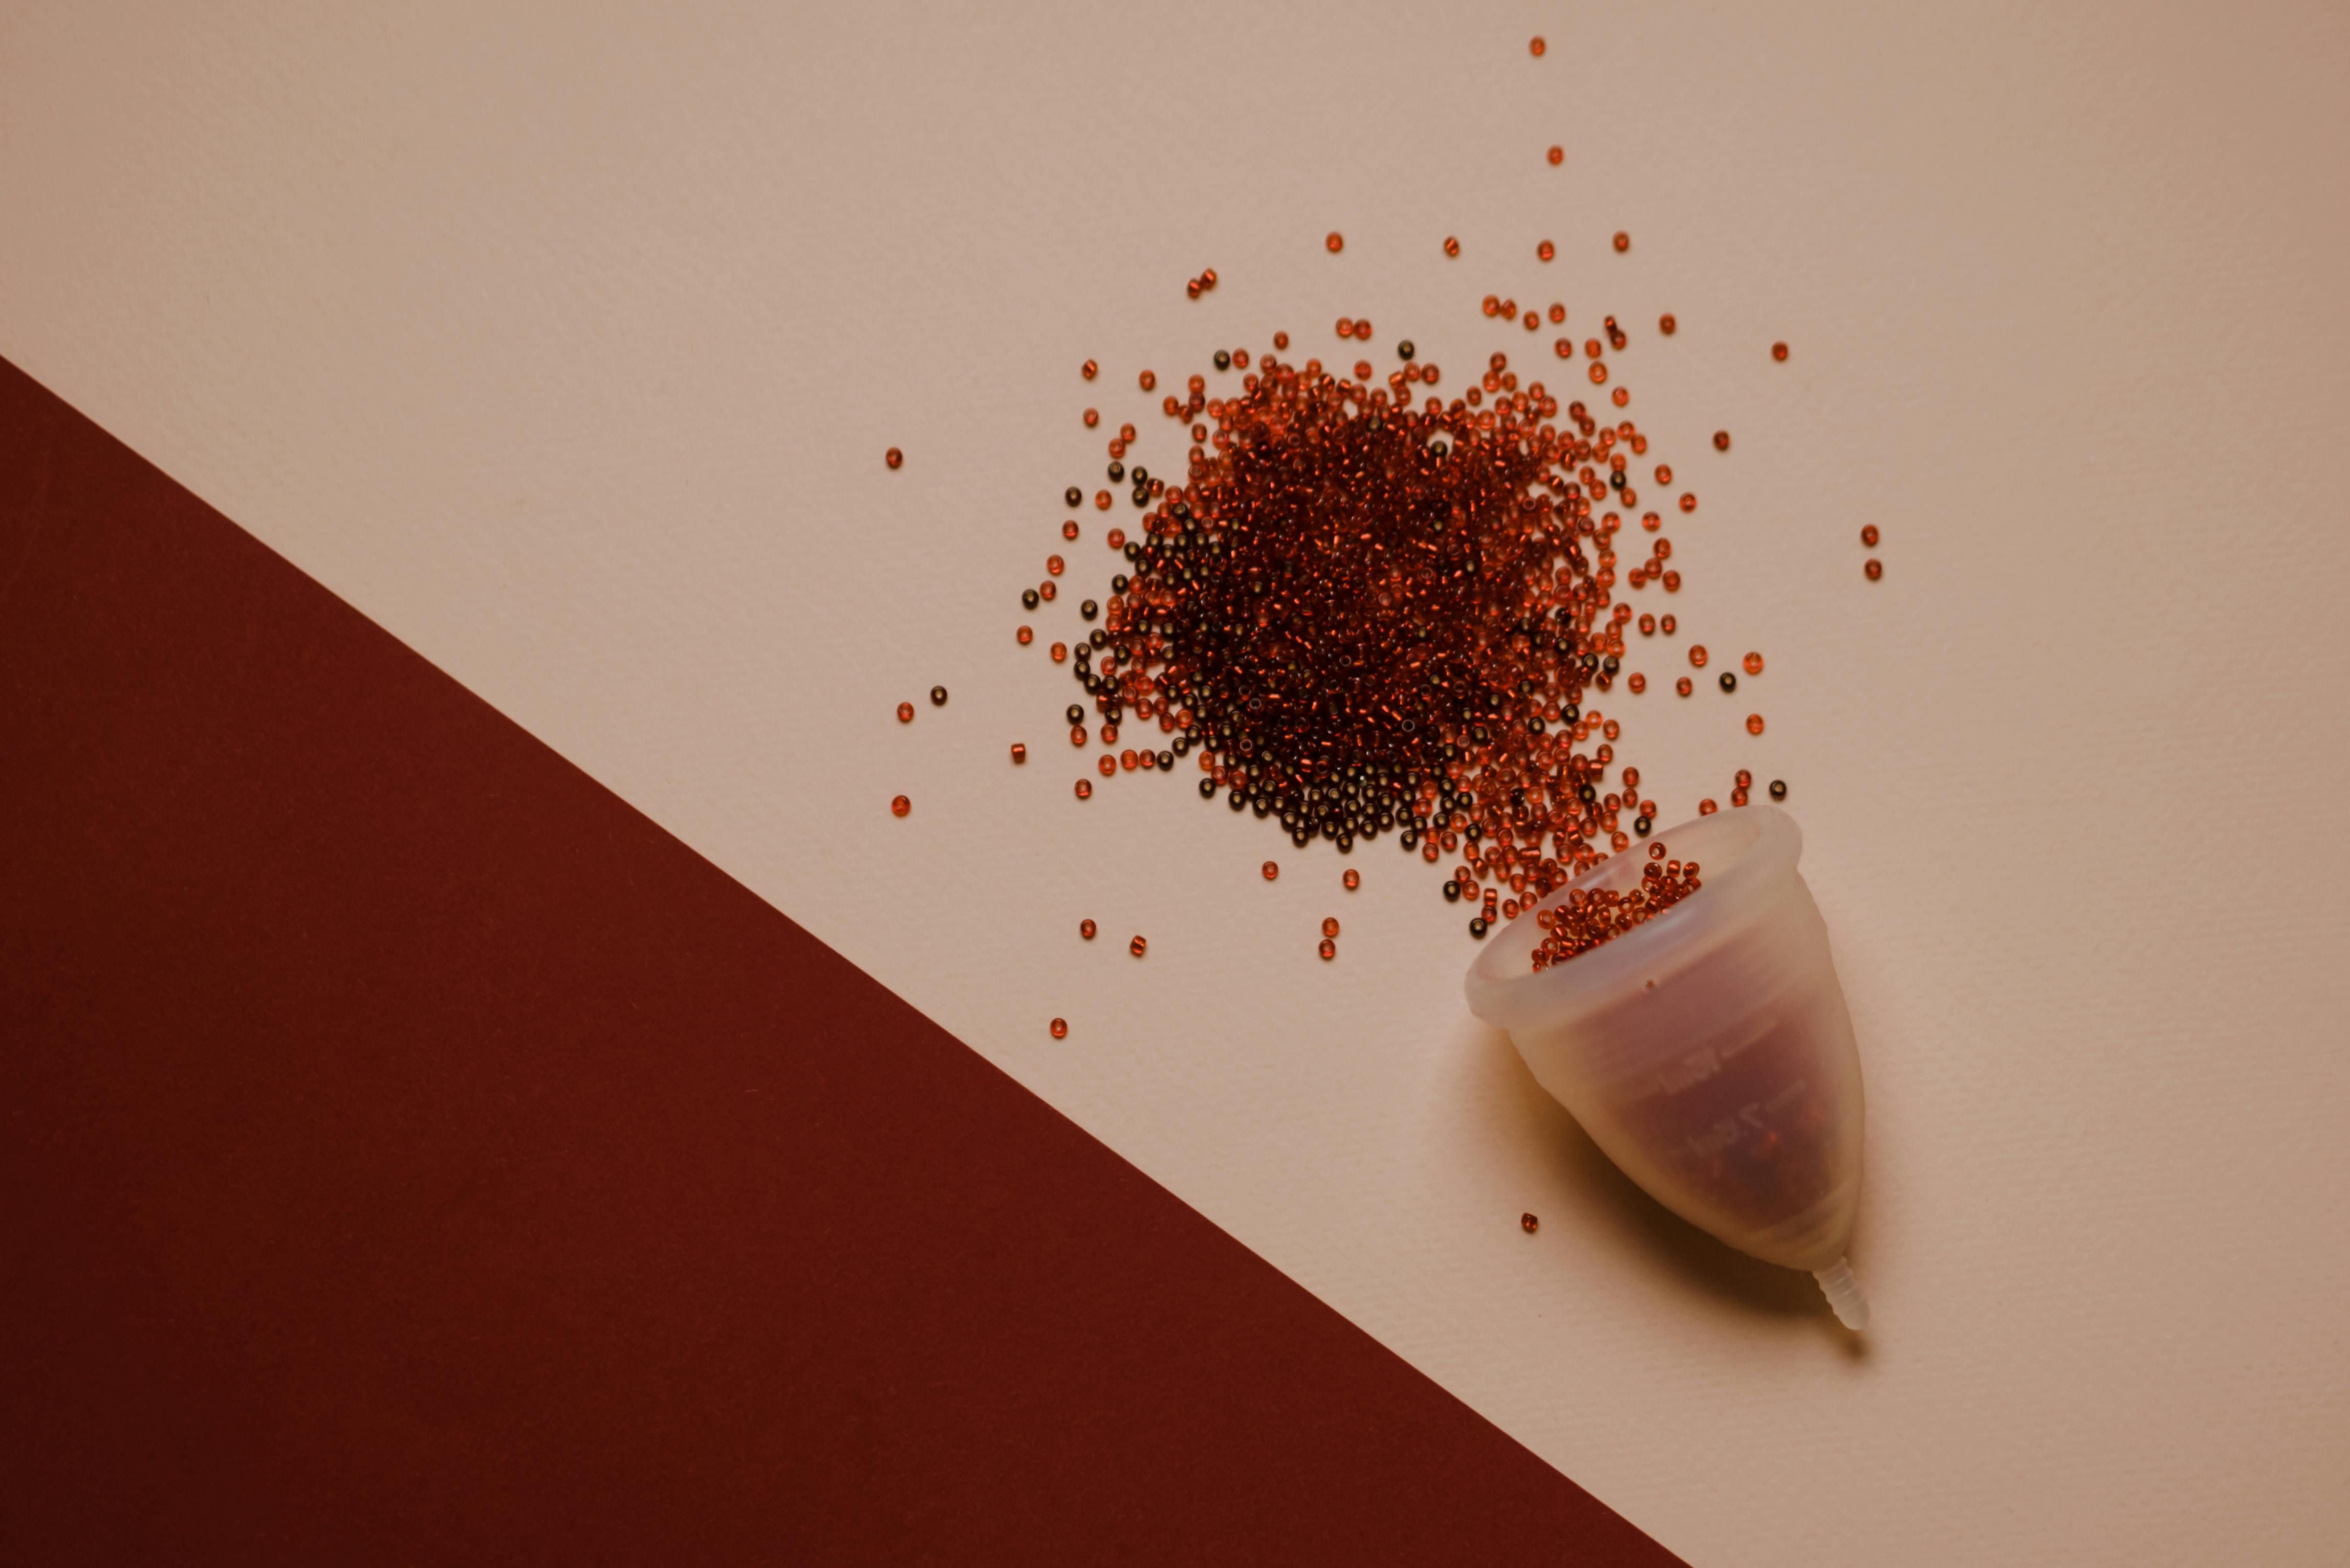 Menstrual cup surrounded by scattered red seeds symbolizing menstrual blood